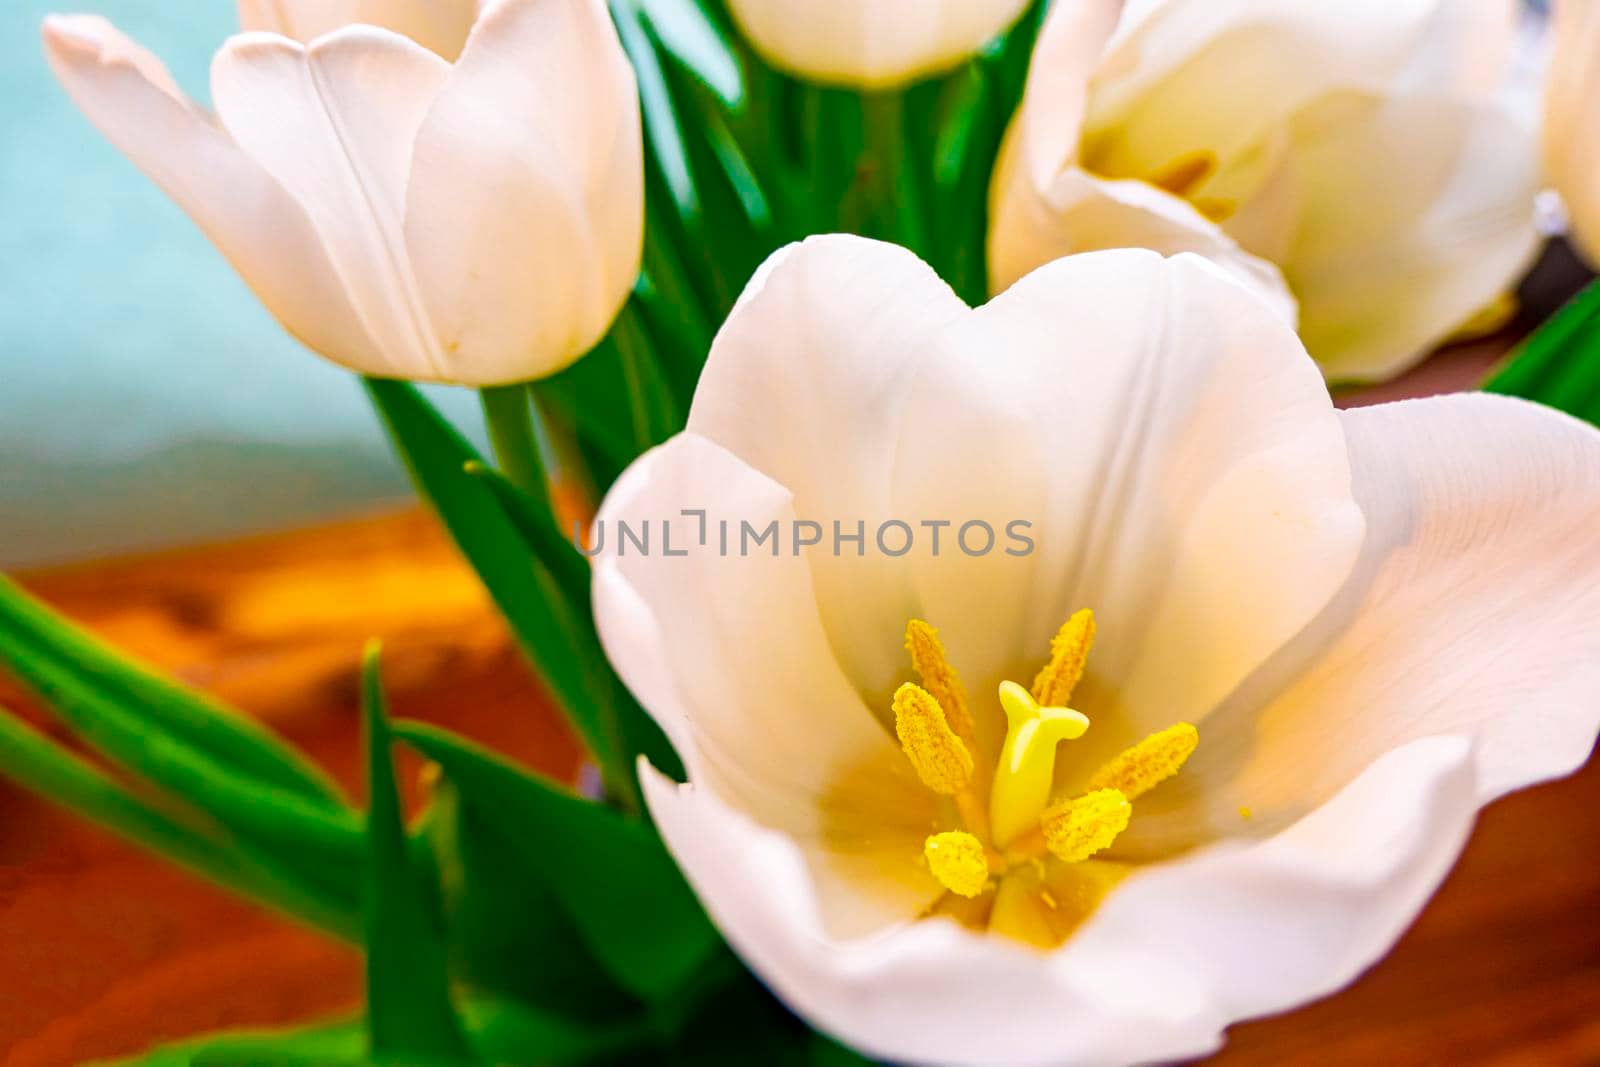 spring greeting card with flowers: white tulips on a sky-blue background. The concept of spring, tenderness, femininity. copy space